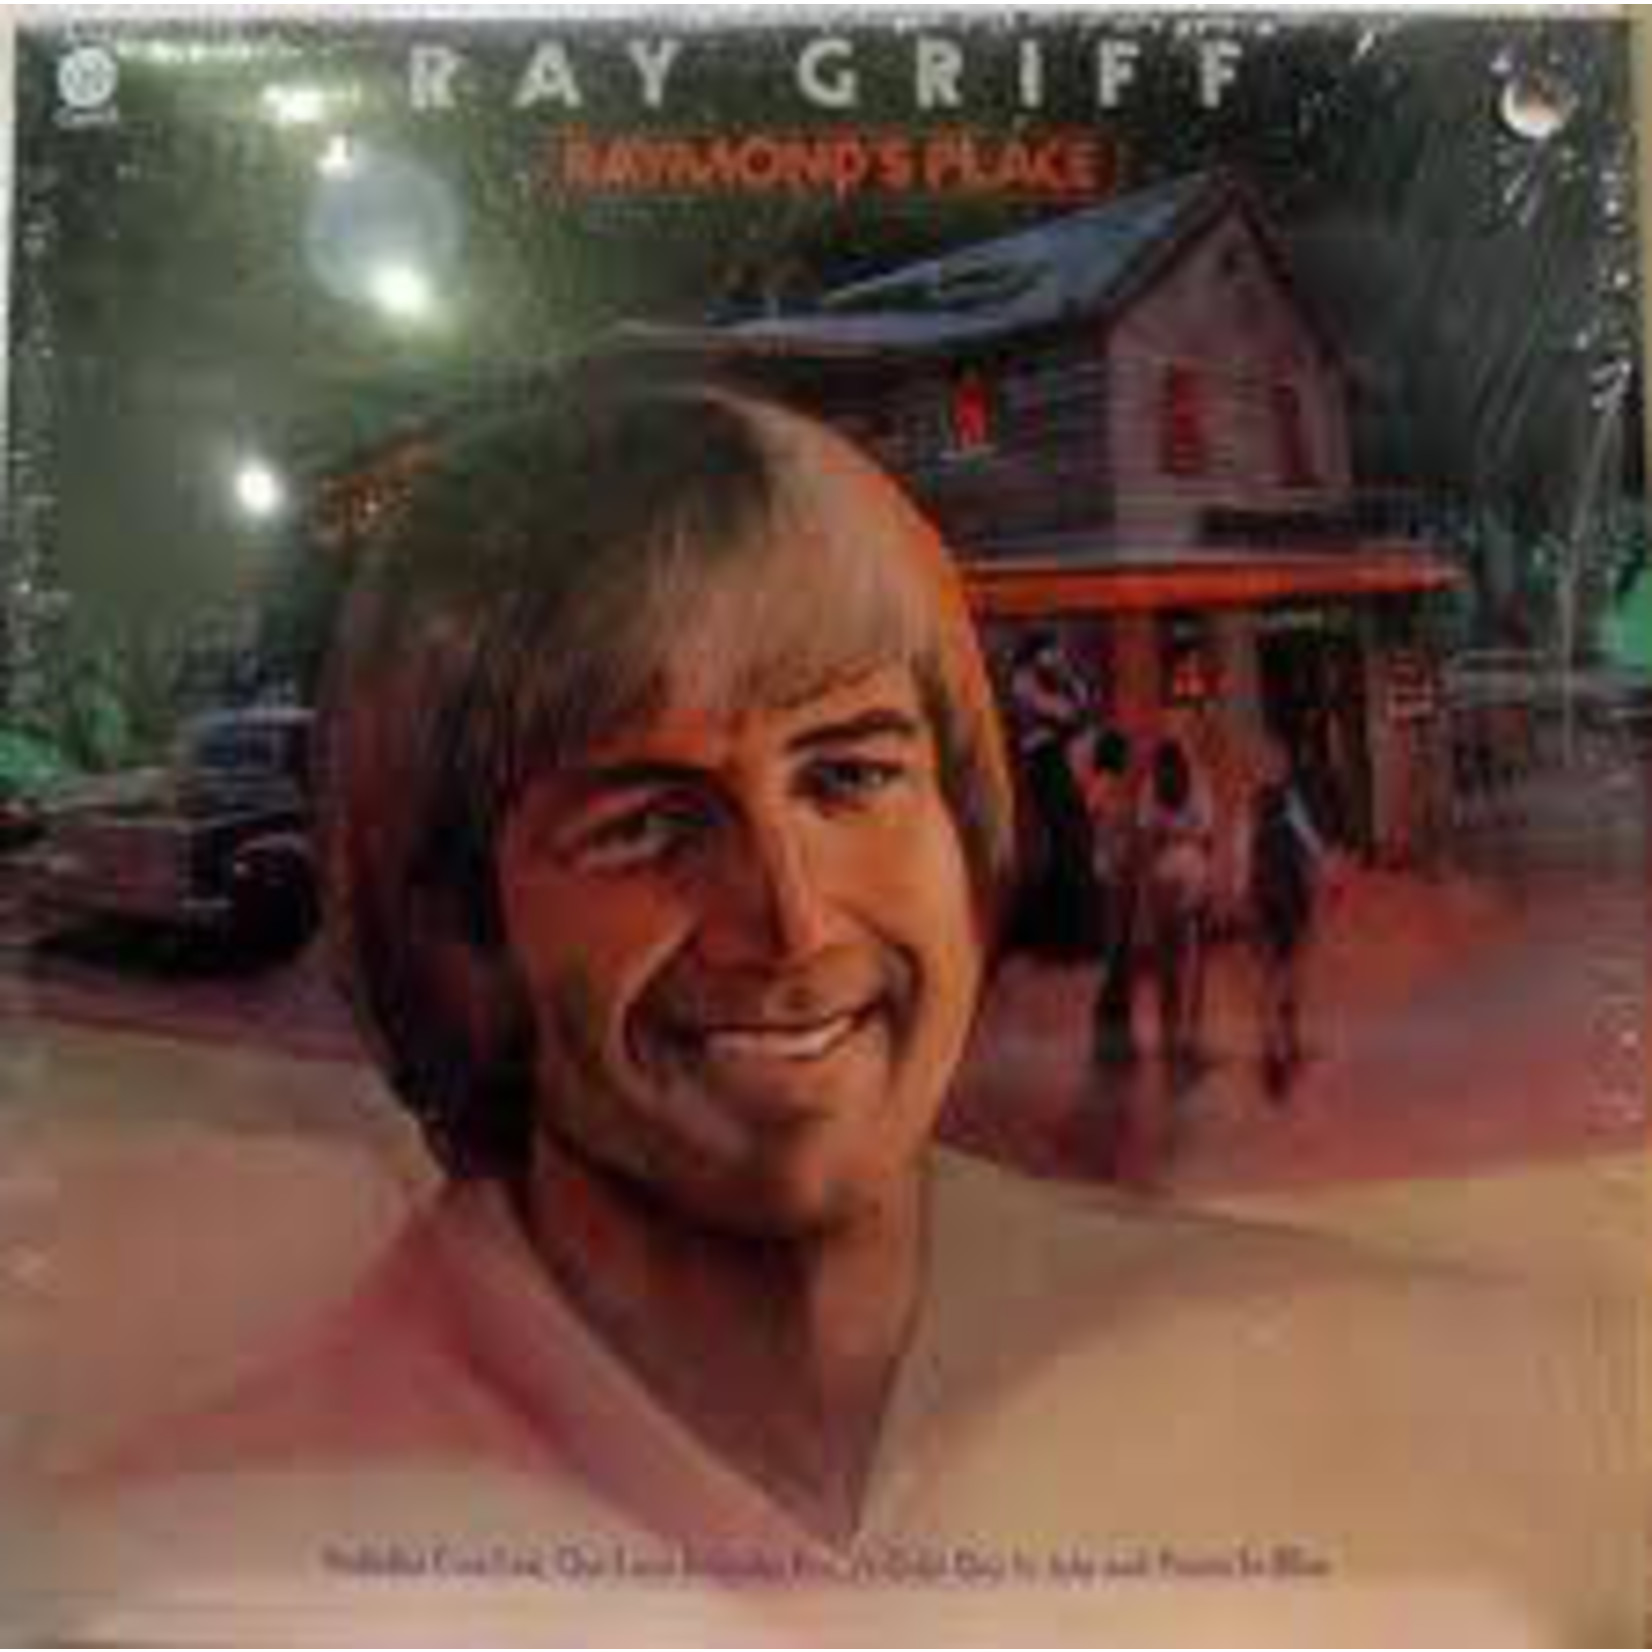 Ray Griff Ray Griff – Raymond's Place (VG, 1977, LP, Capitol Records – ST-11718, Canada)